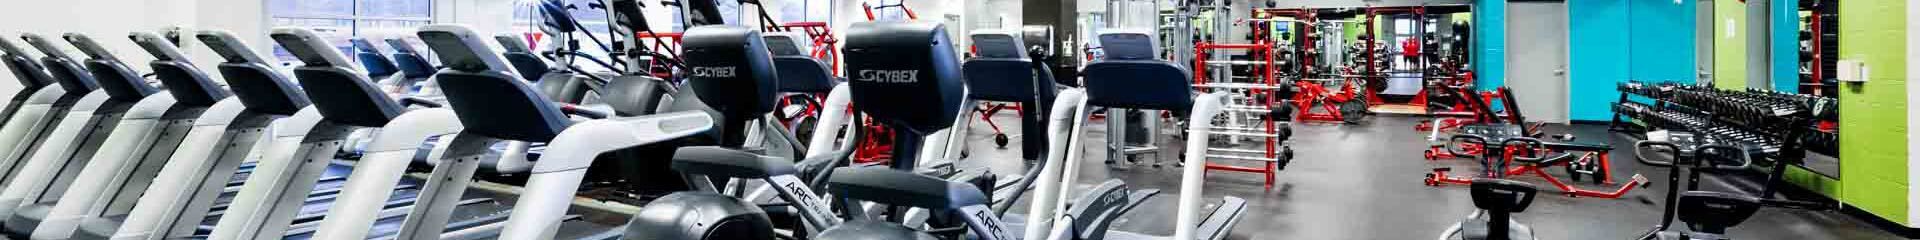 Treadmills and dumbbells in a gym